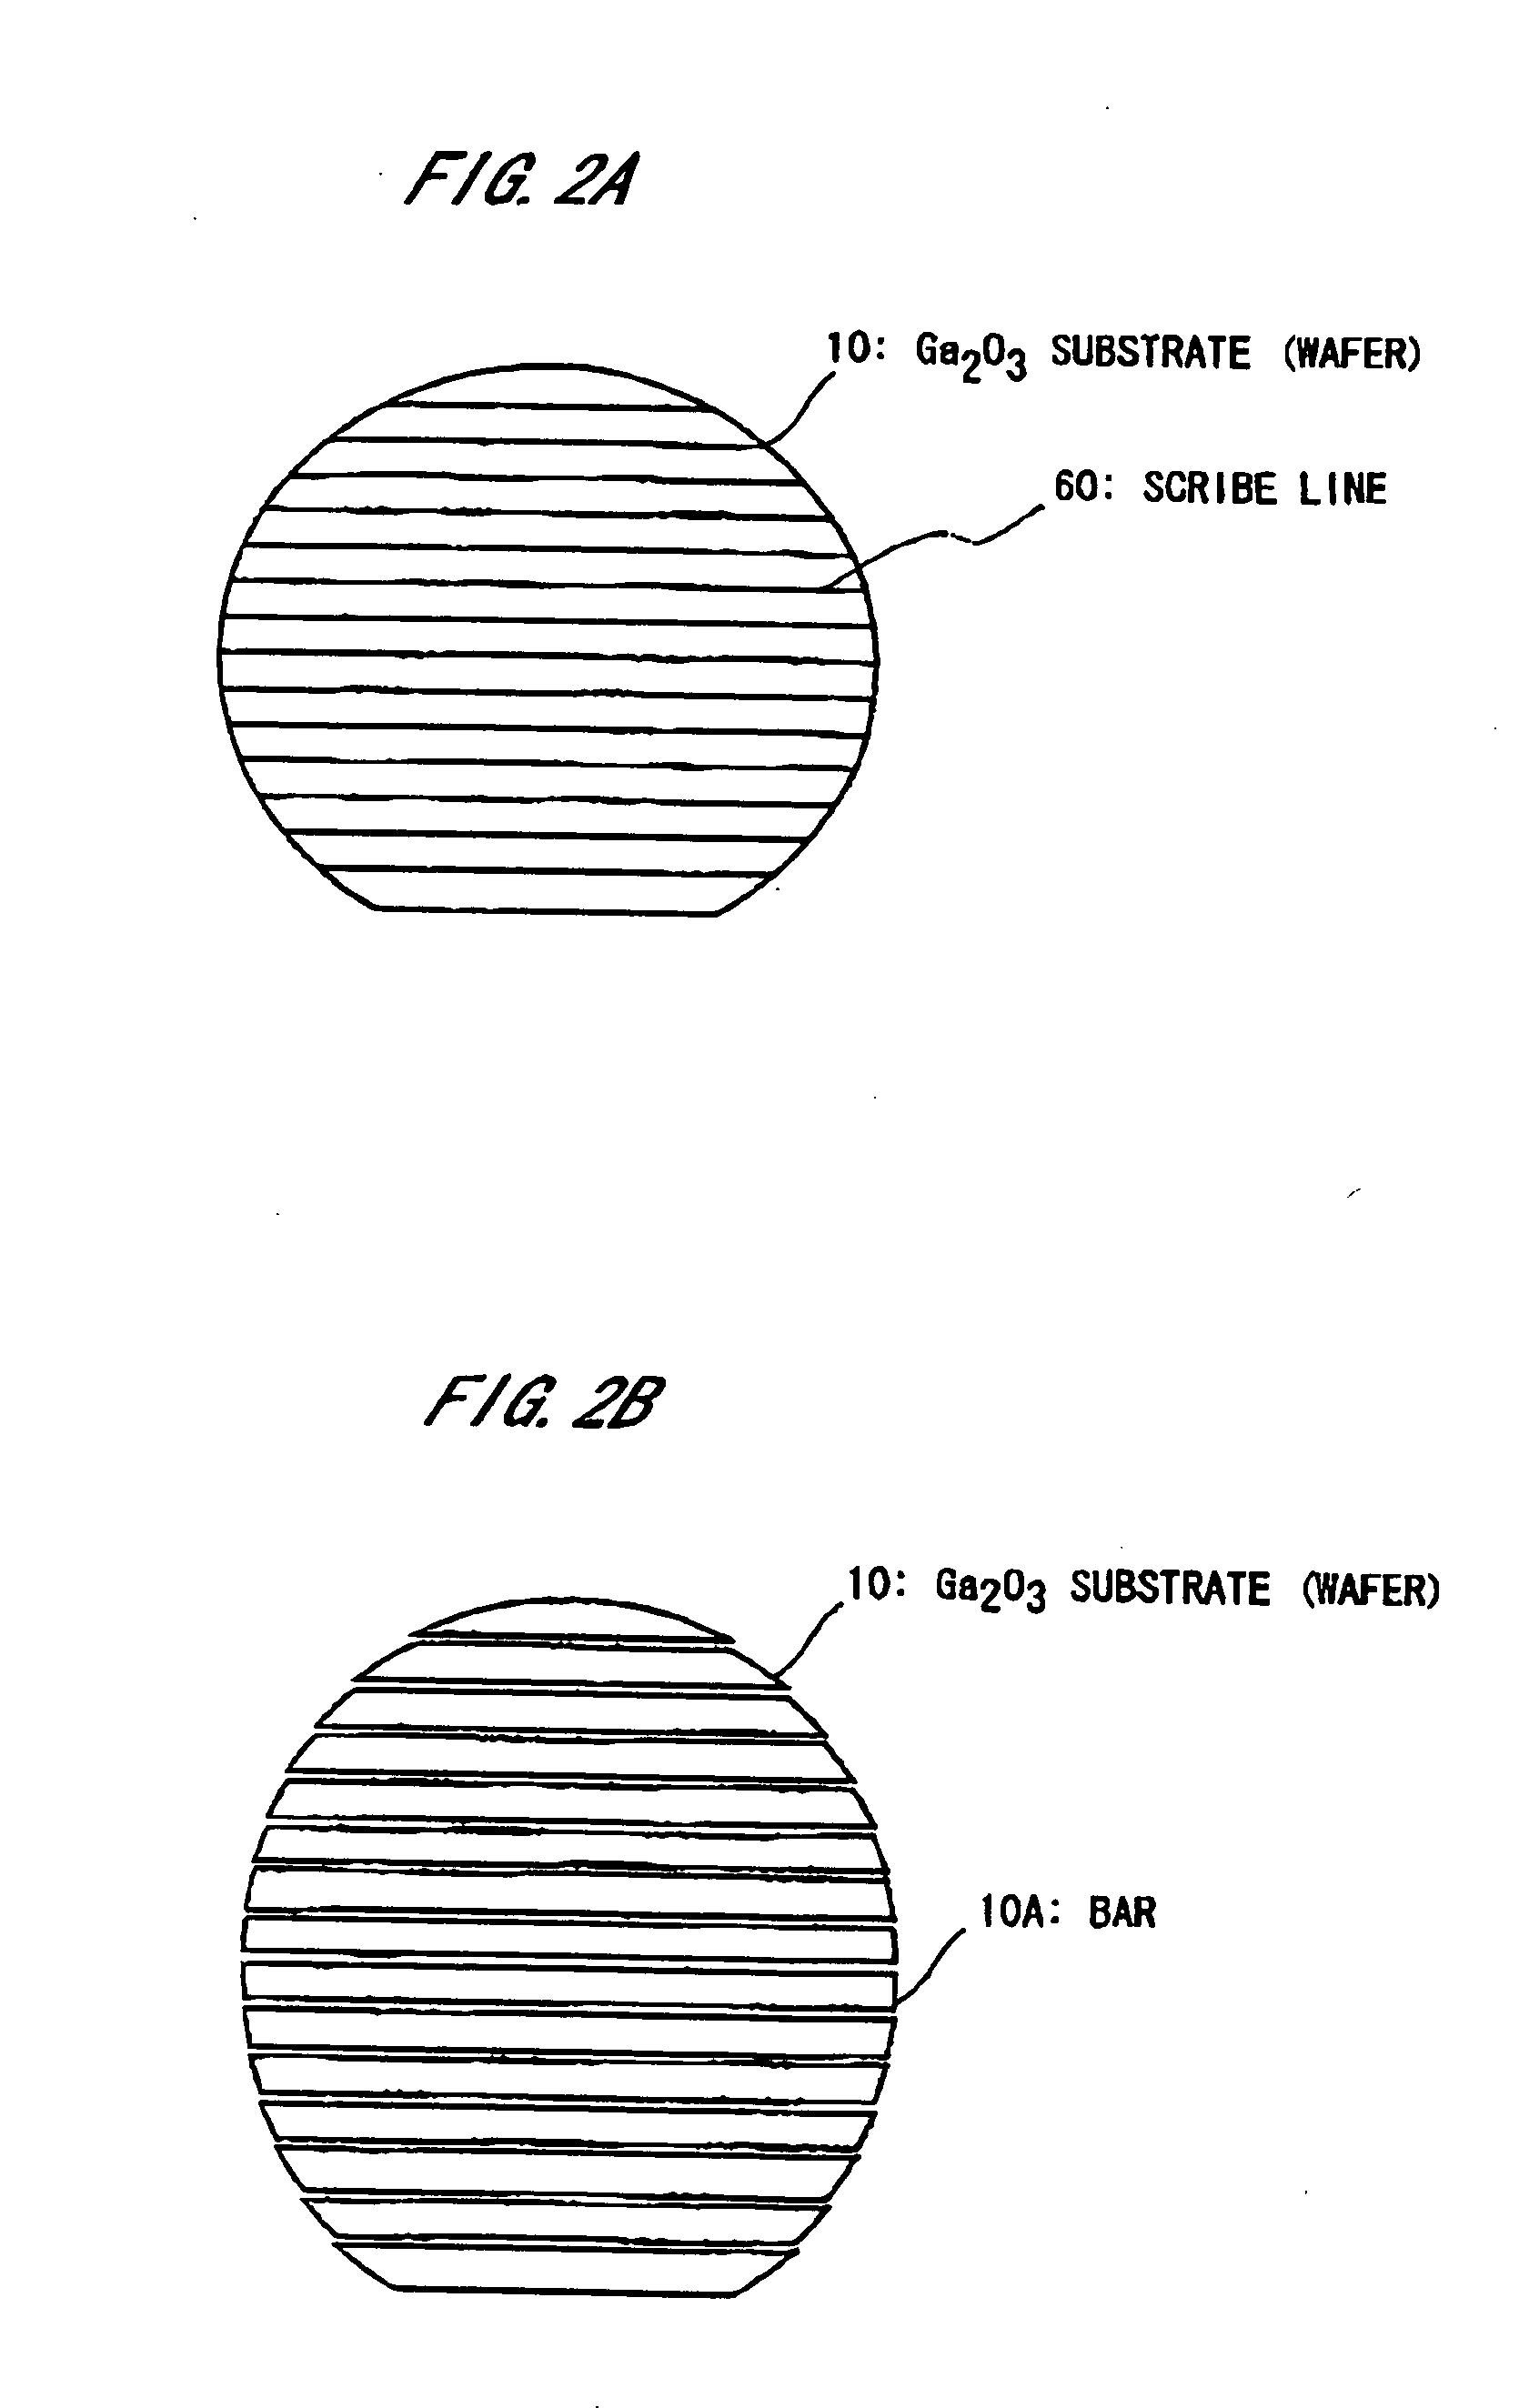 Semiconductor element and method of making same